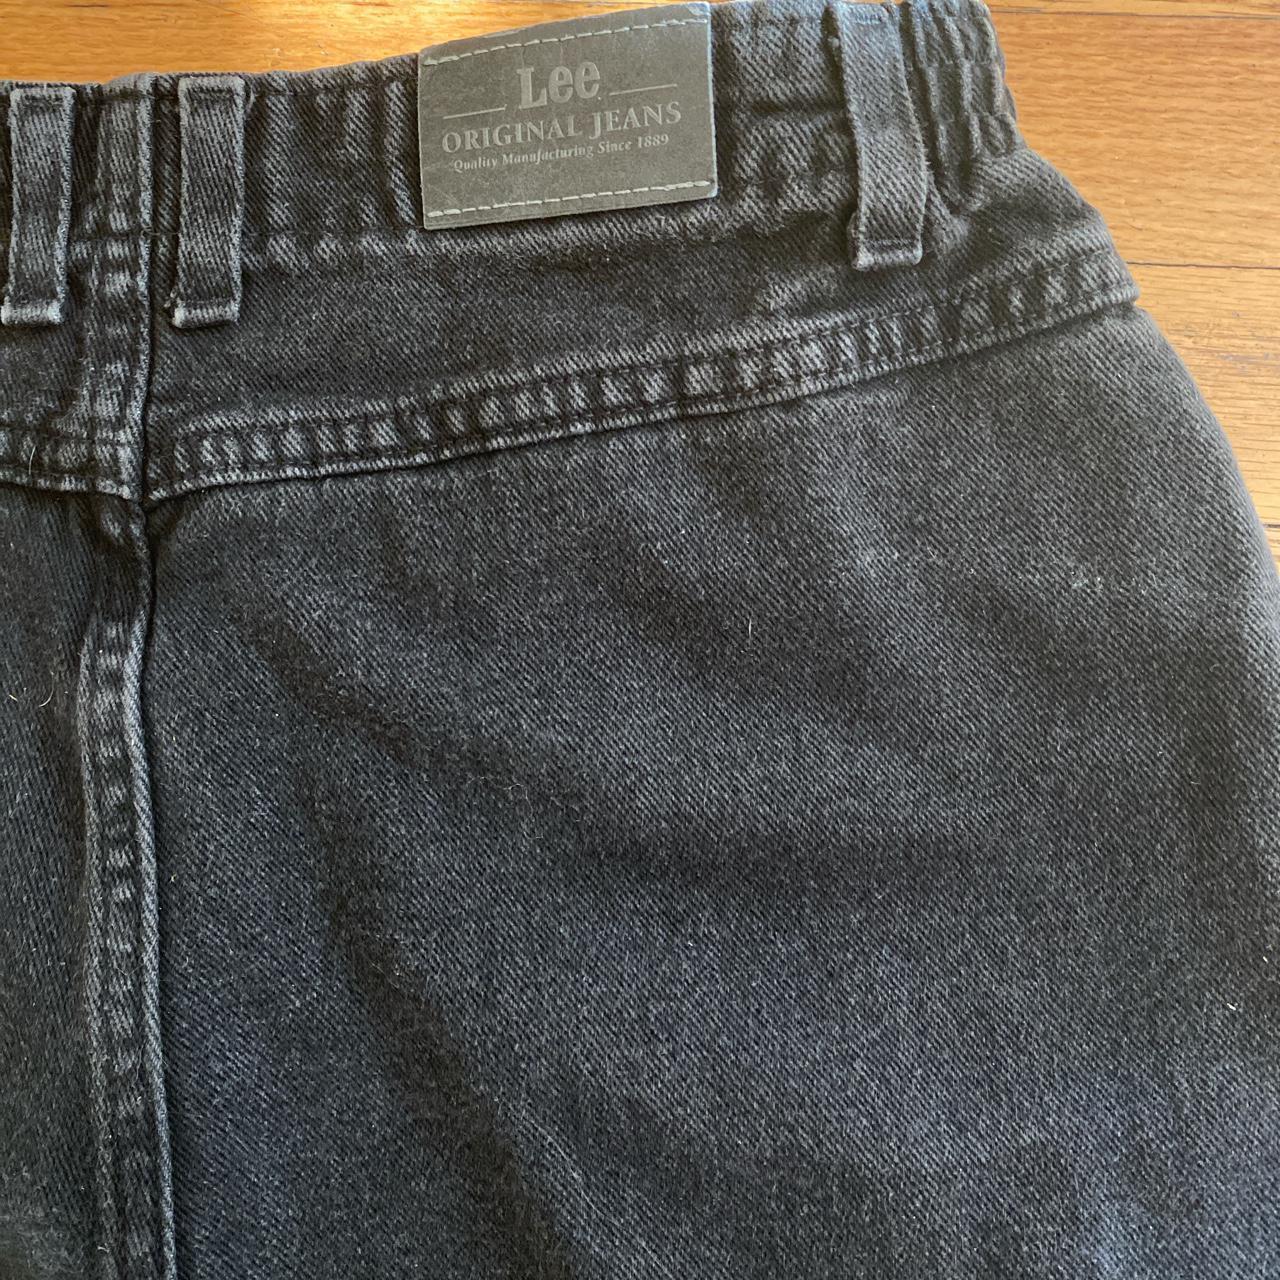 lee mid rise grey baggy straight leg jeans. fit... - Depop